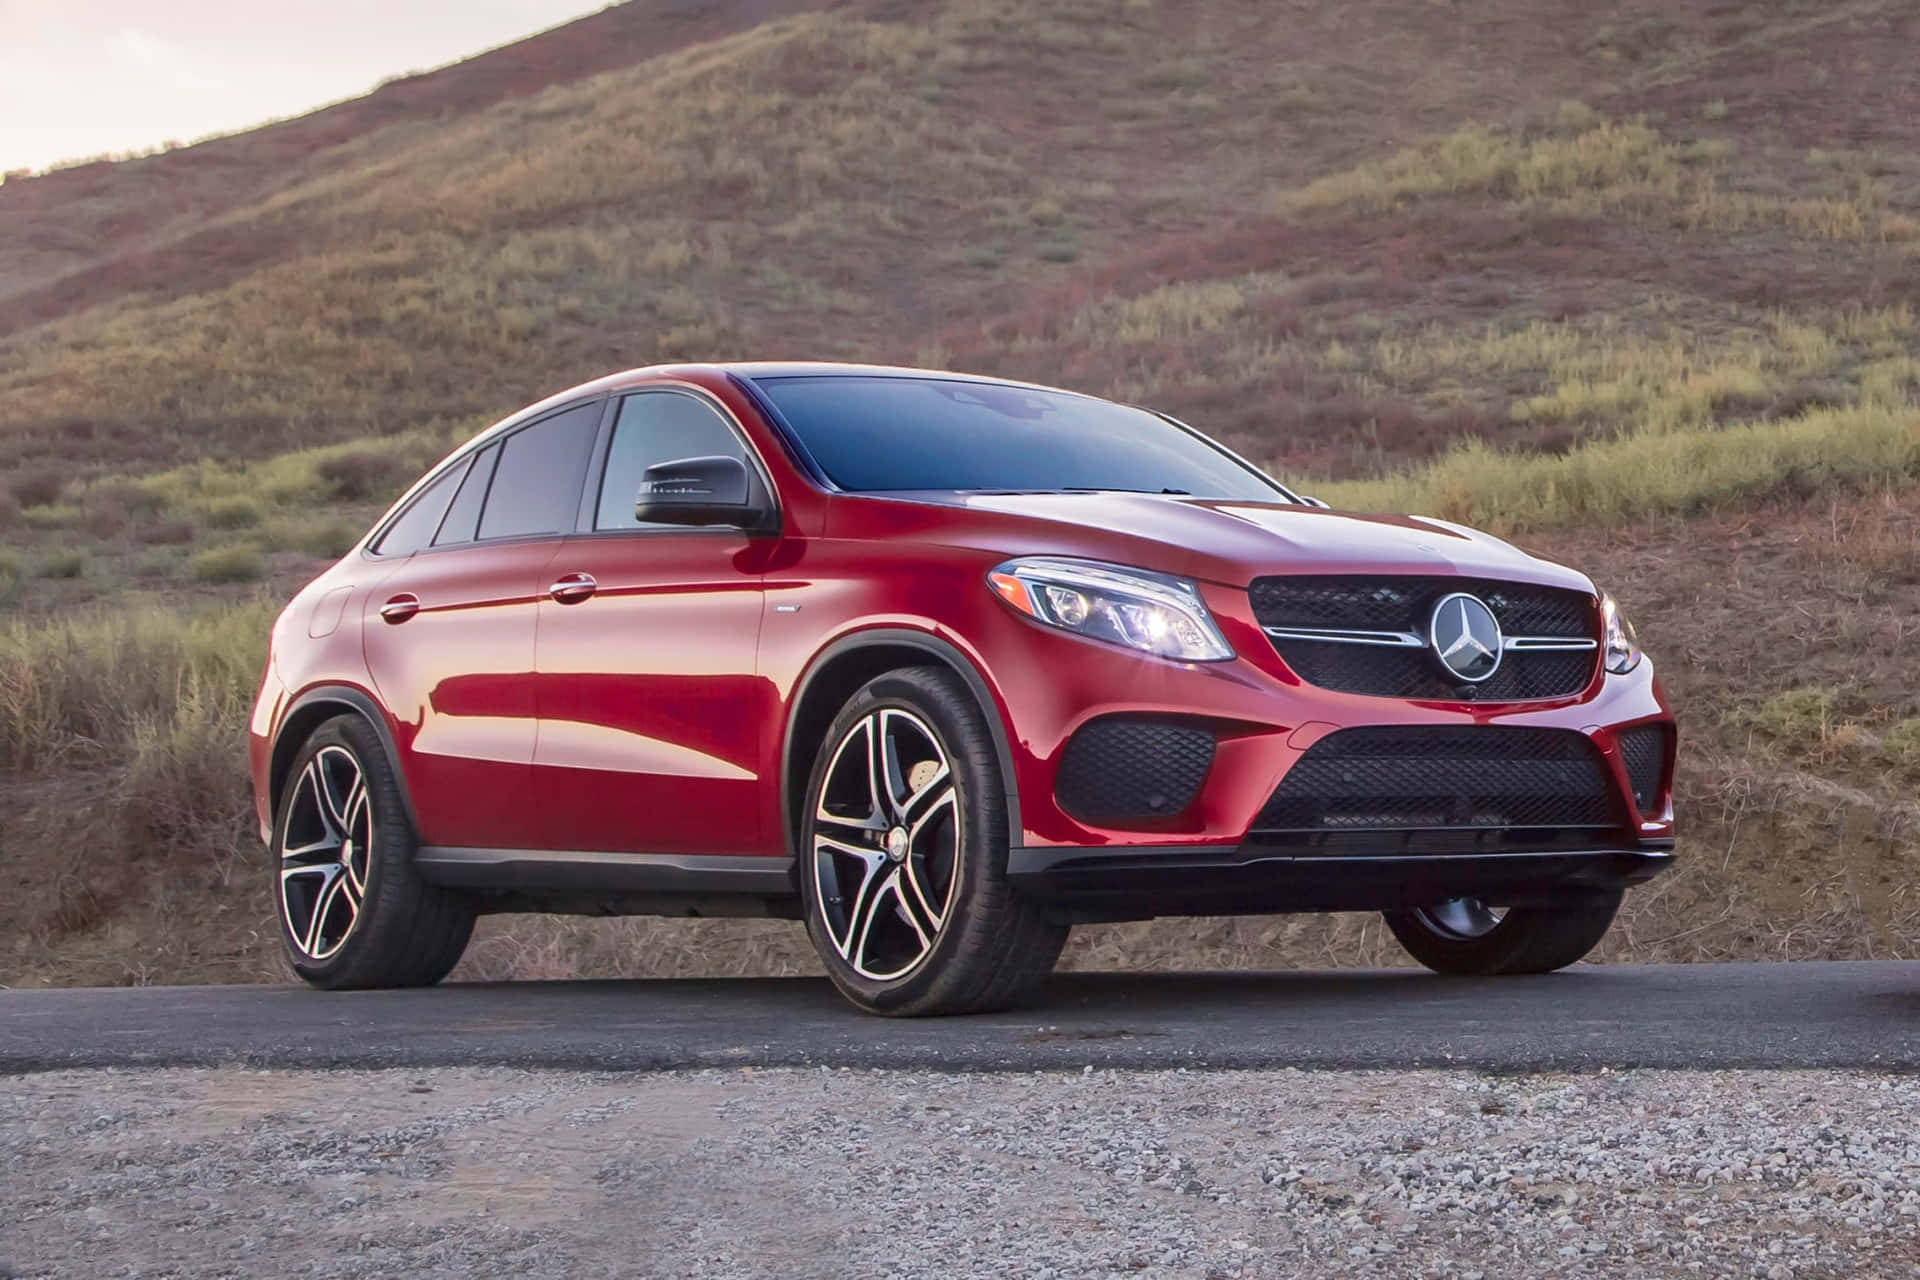 Captivating Mercedes-Benz GLE-Class in Action Wallpaper